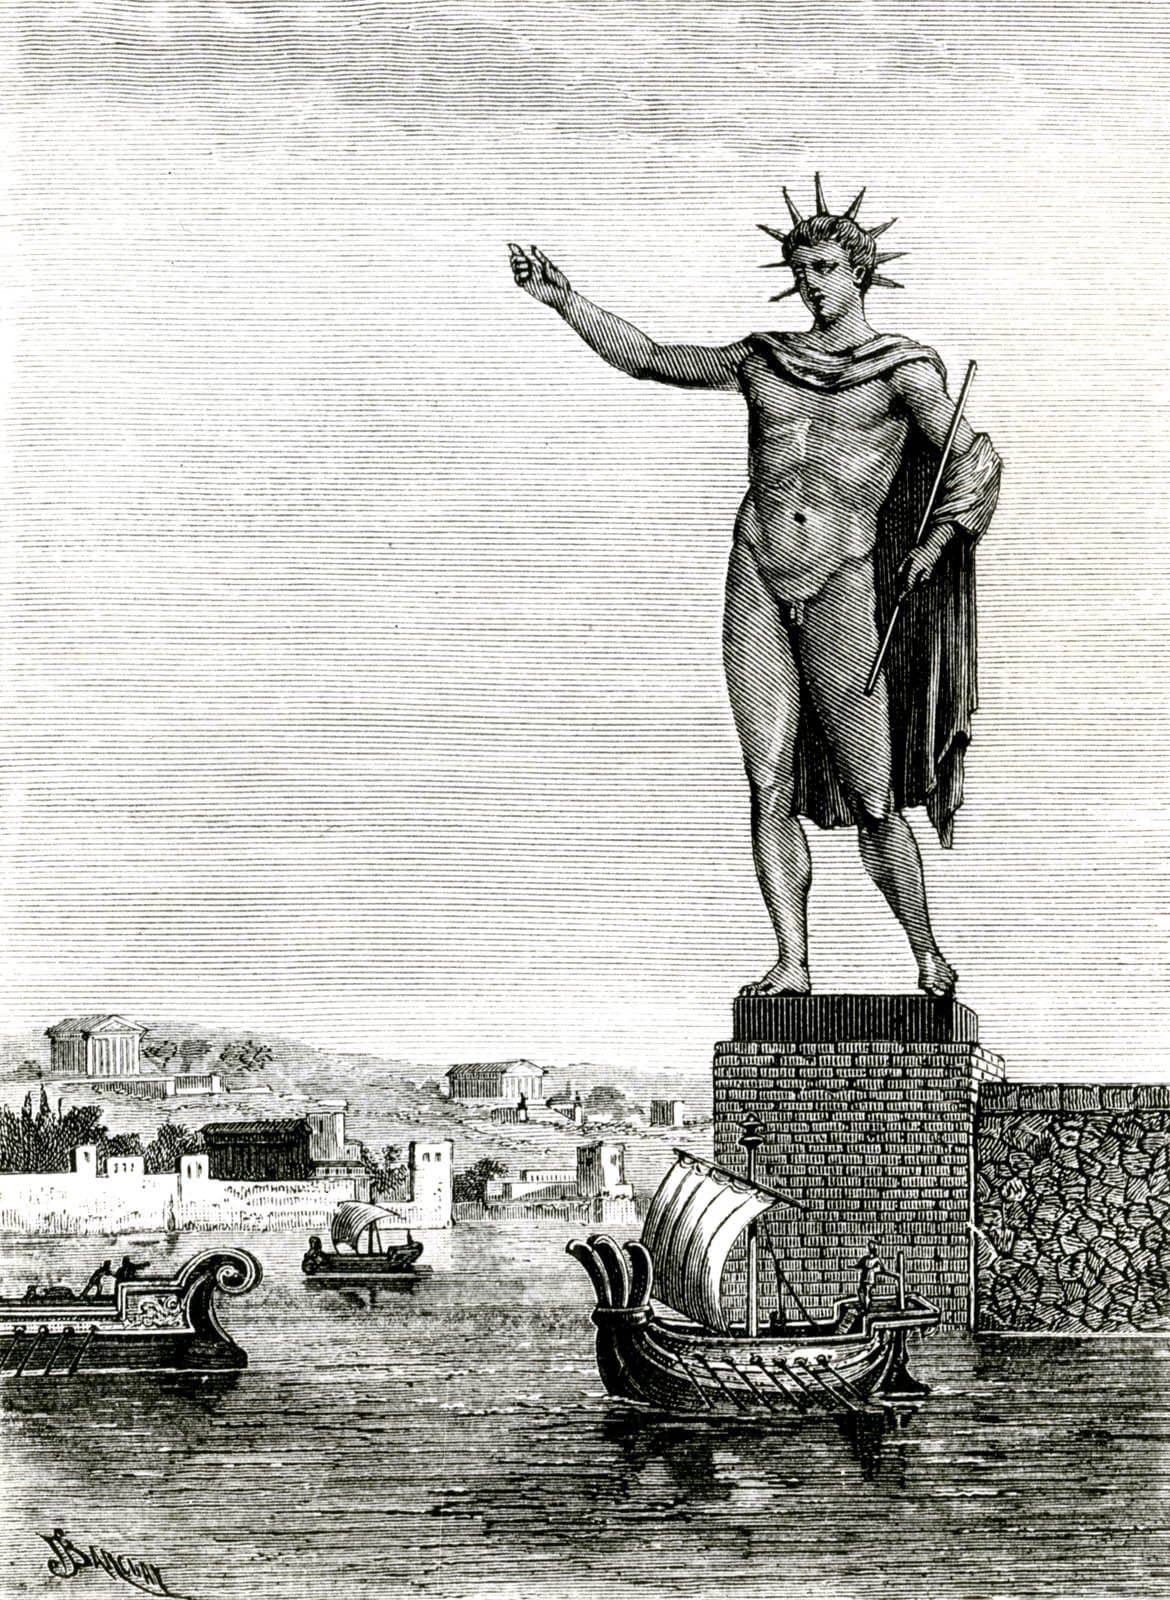 The Colossus of Rhodes | Photo source: Wikipedia